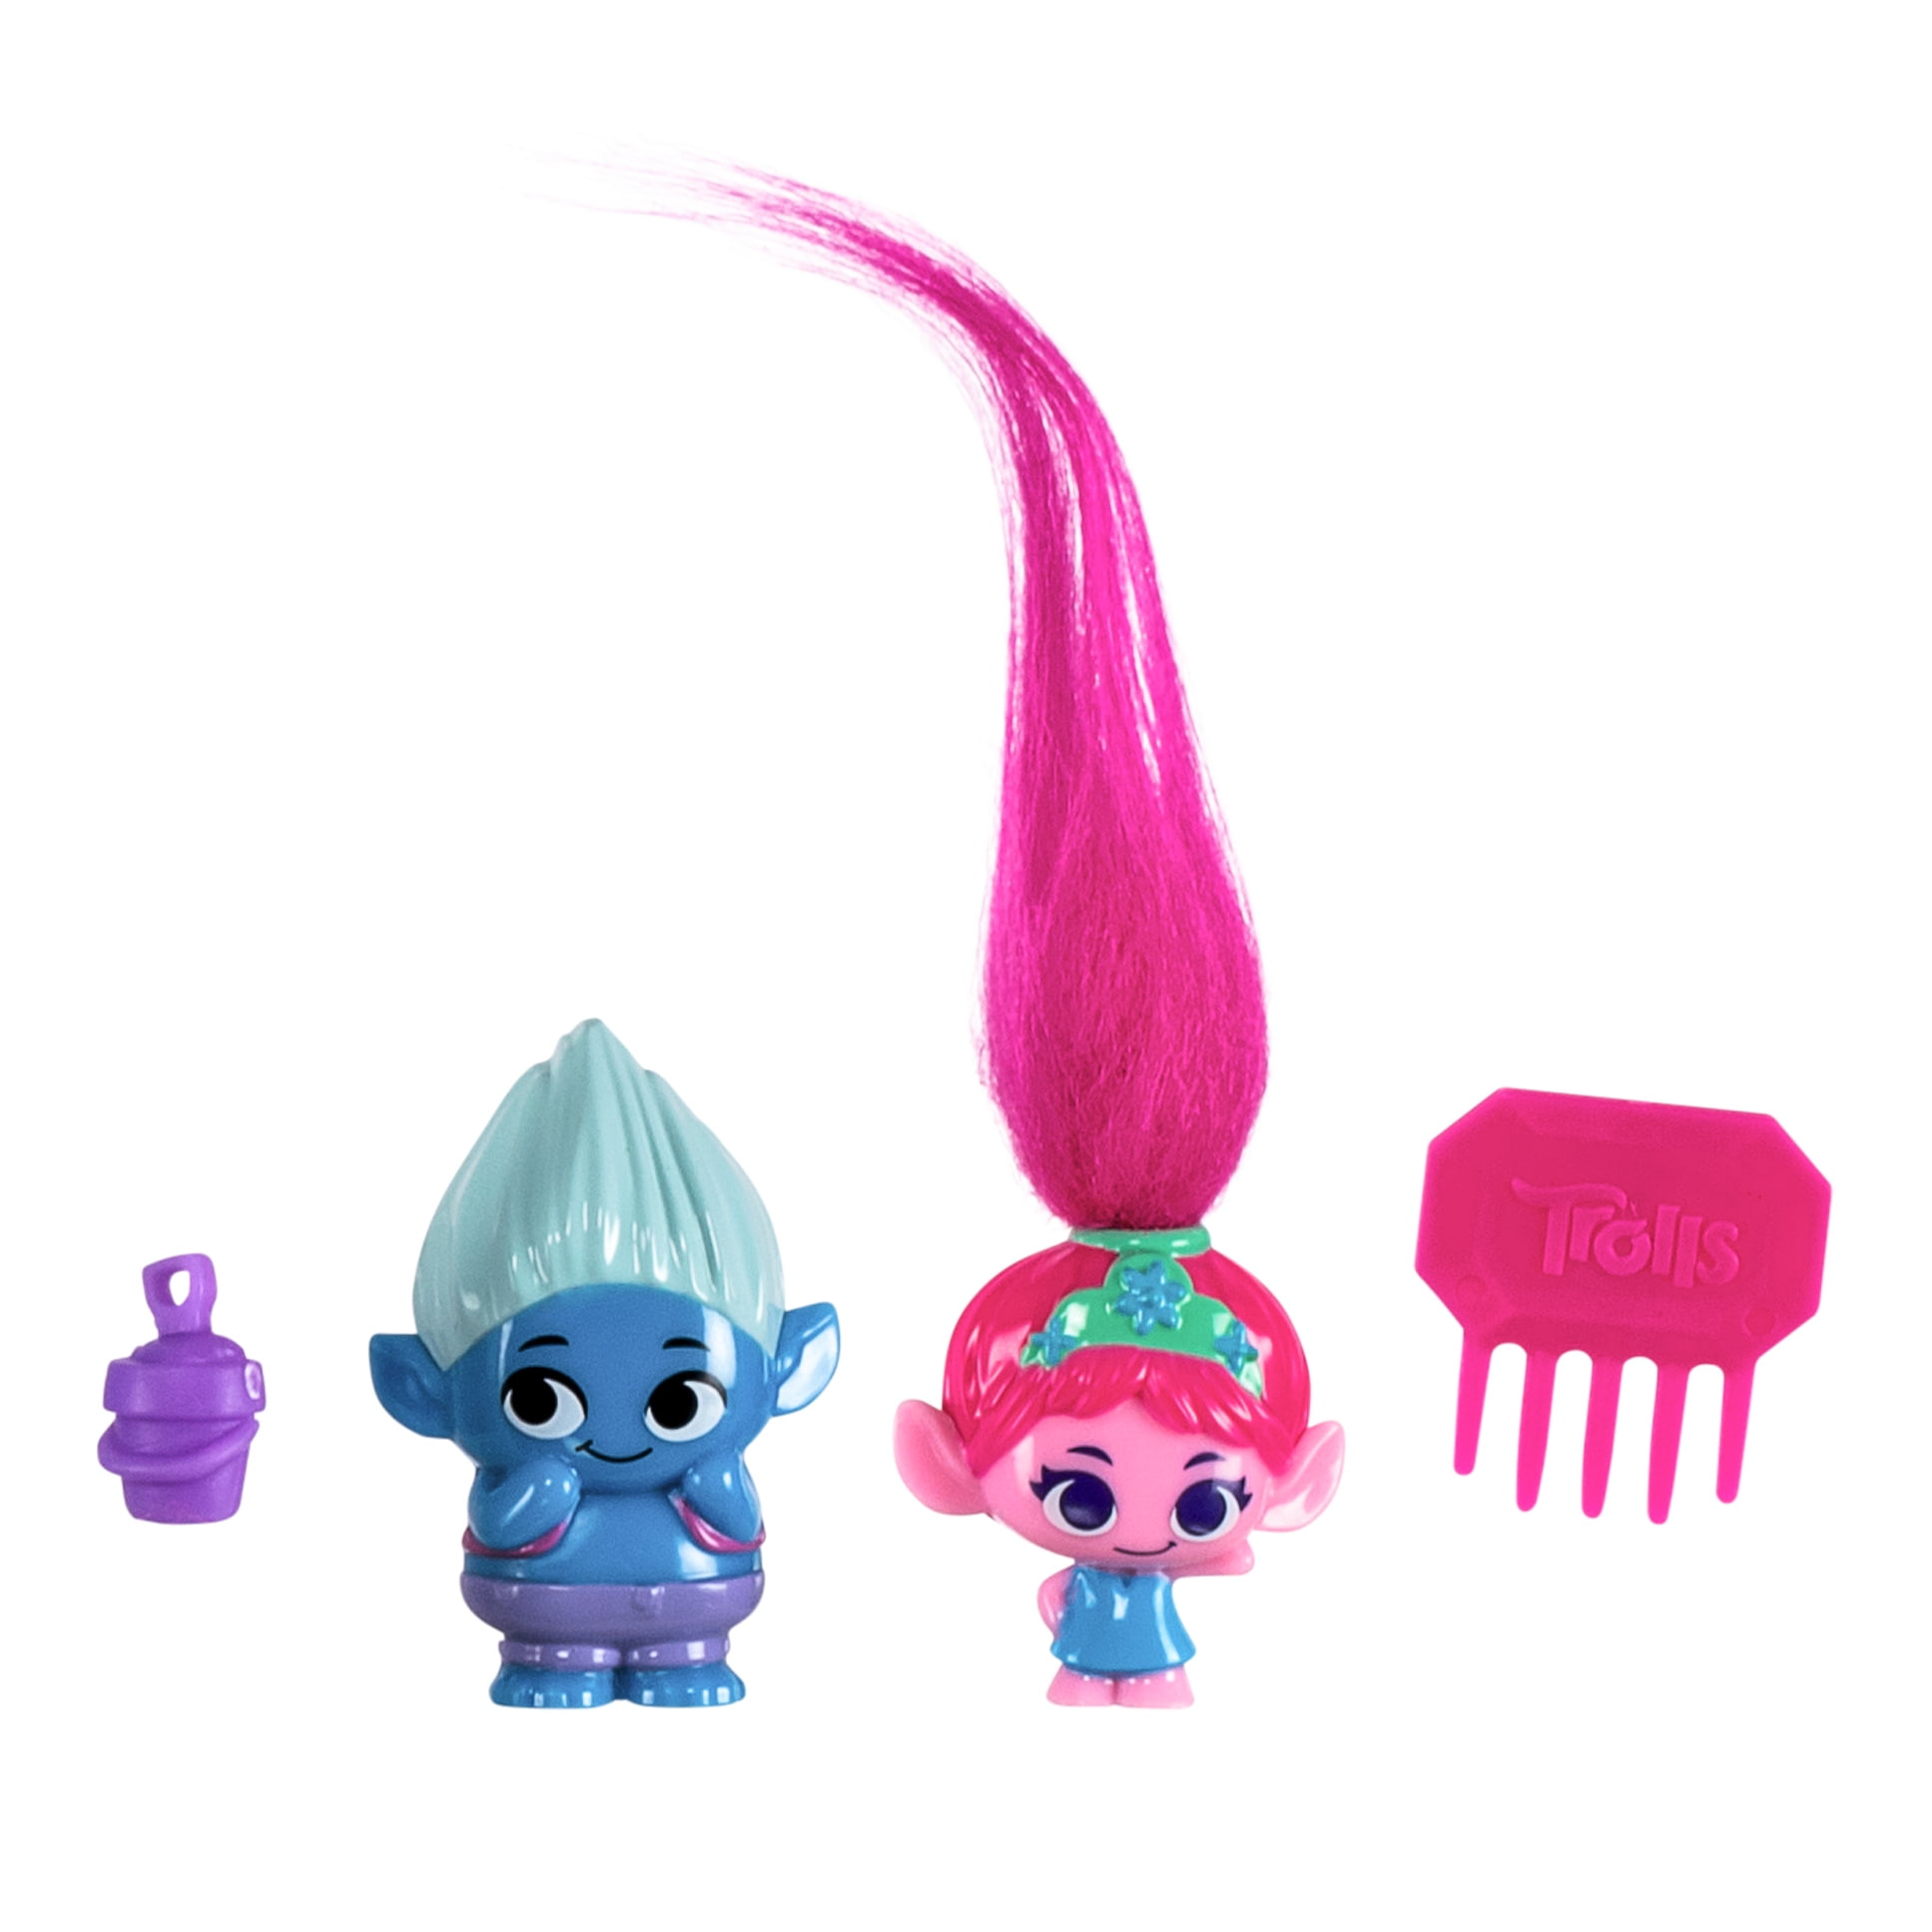  Trolls DreamWorks Band Together Mineez 11pc Brozone + Friends  Performance Pack - 11 Mineez 1.5 Inch Collectible Figures and 1 Accessory :  Toys & Games